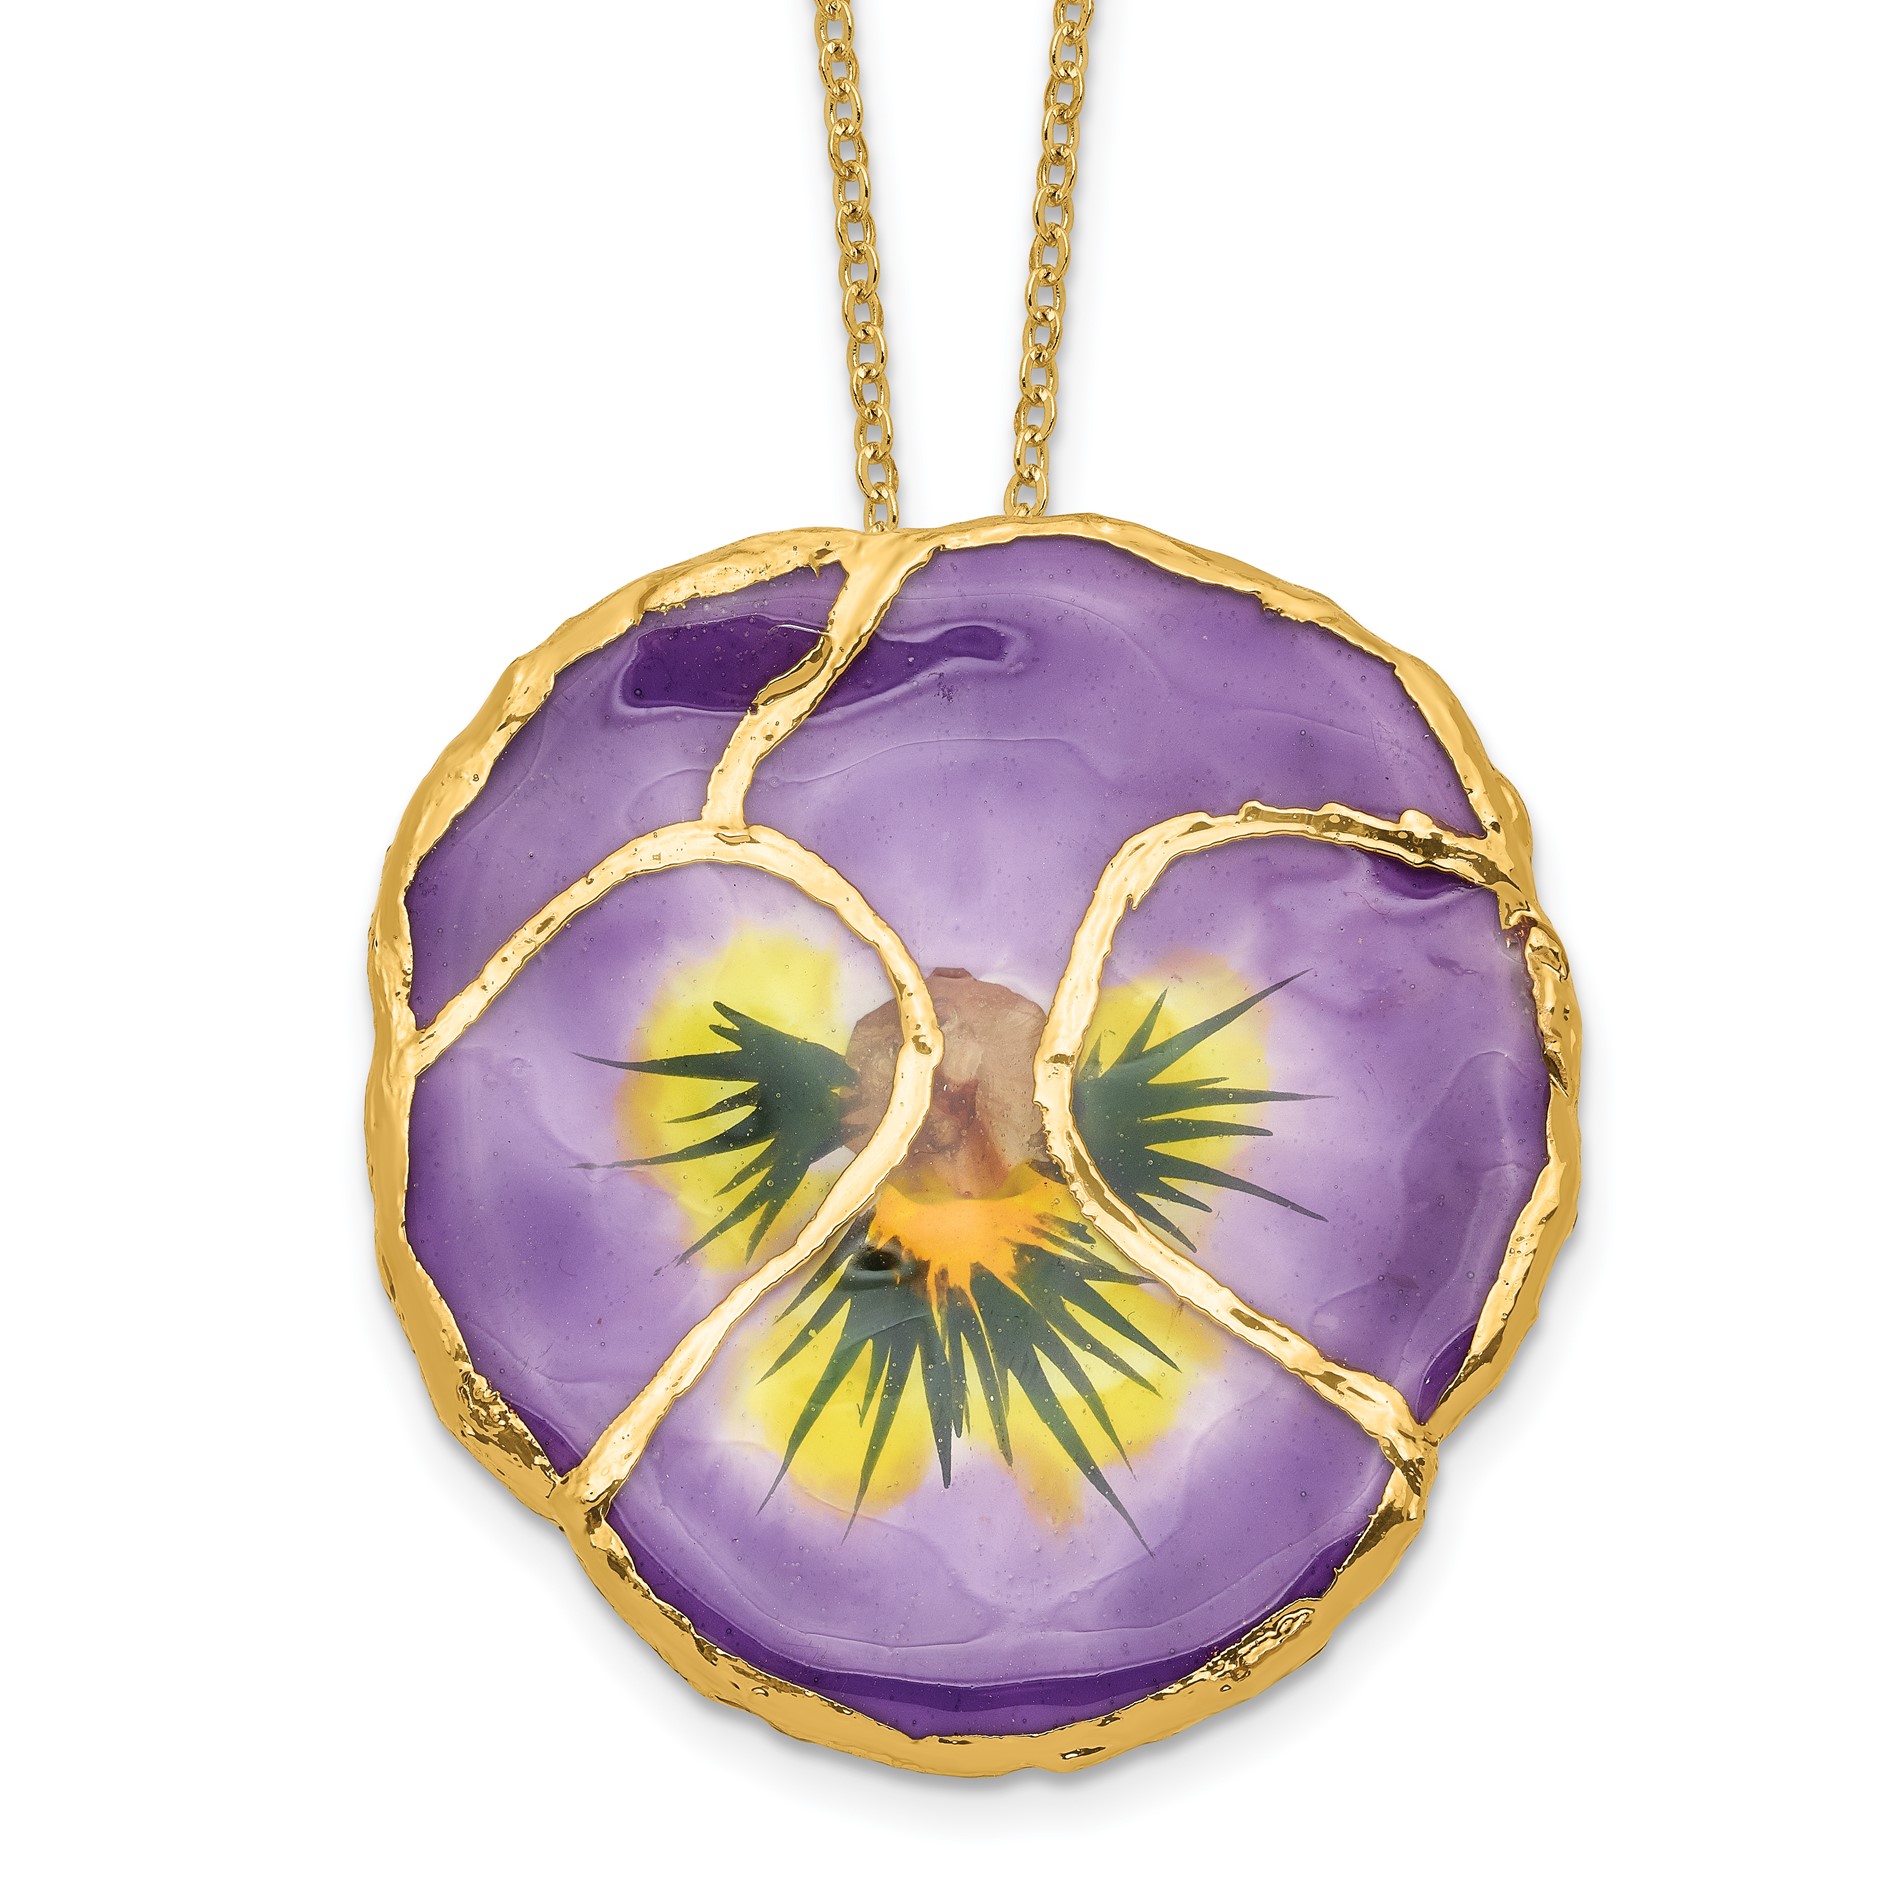 Diamond2Deal Lacquer Dipped Lilac Pansy Necklace with Gold -Tone Chain Necklace